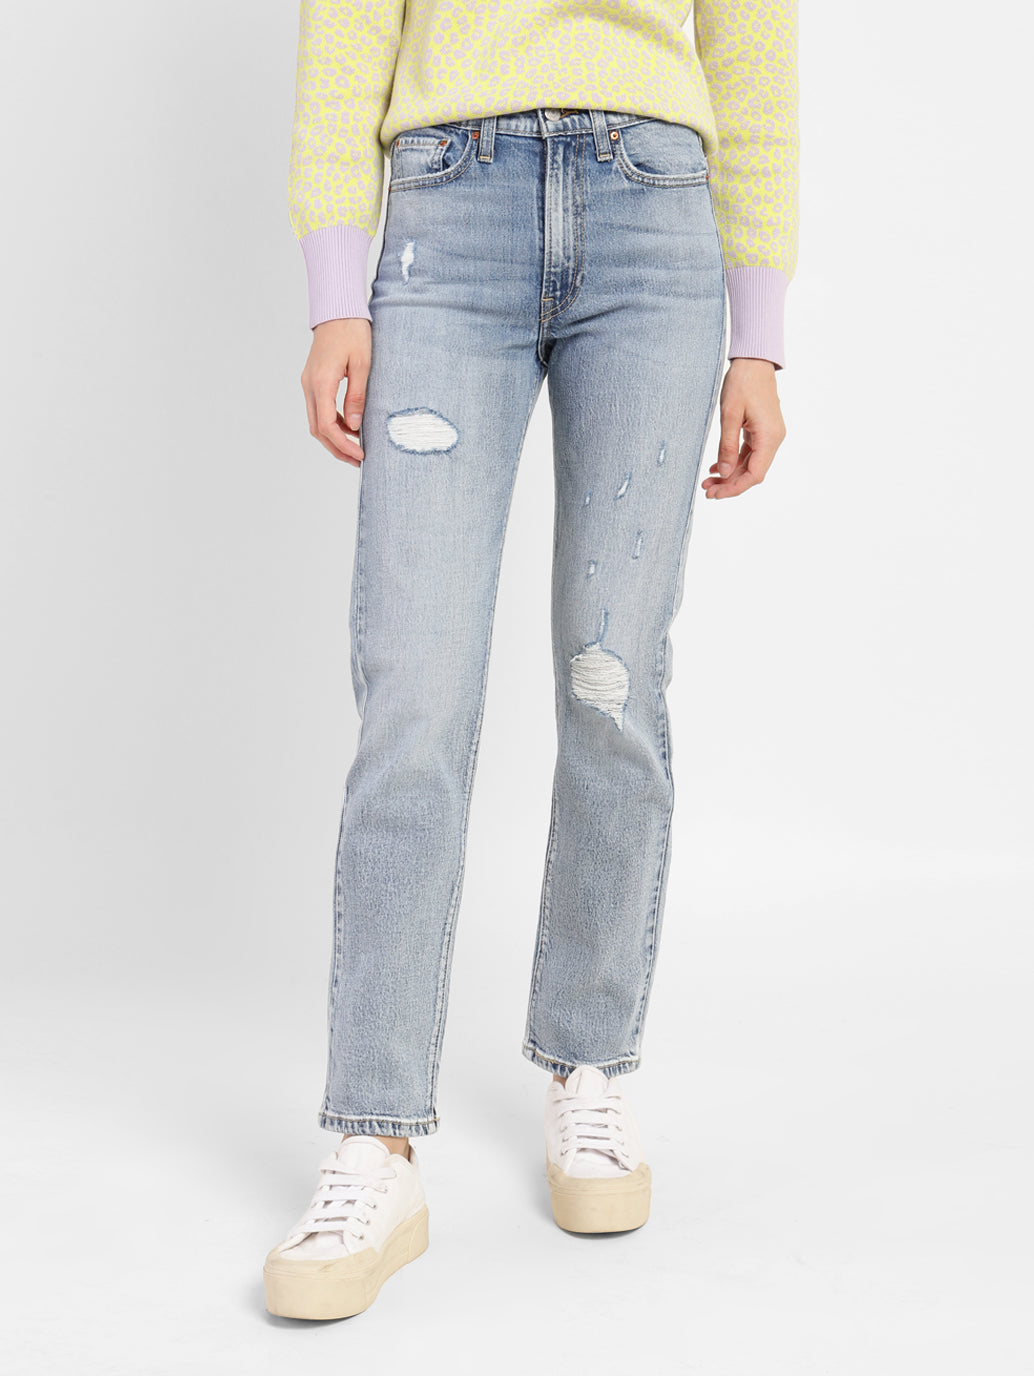 Women's High Rise 70's Slim Fit Jeans